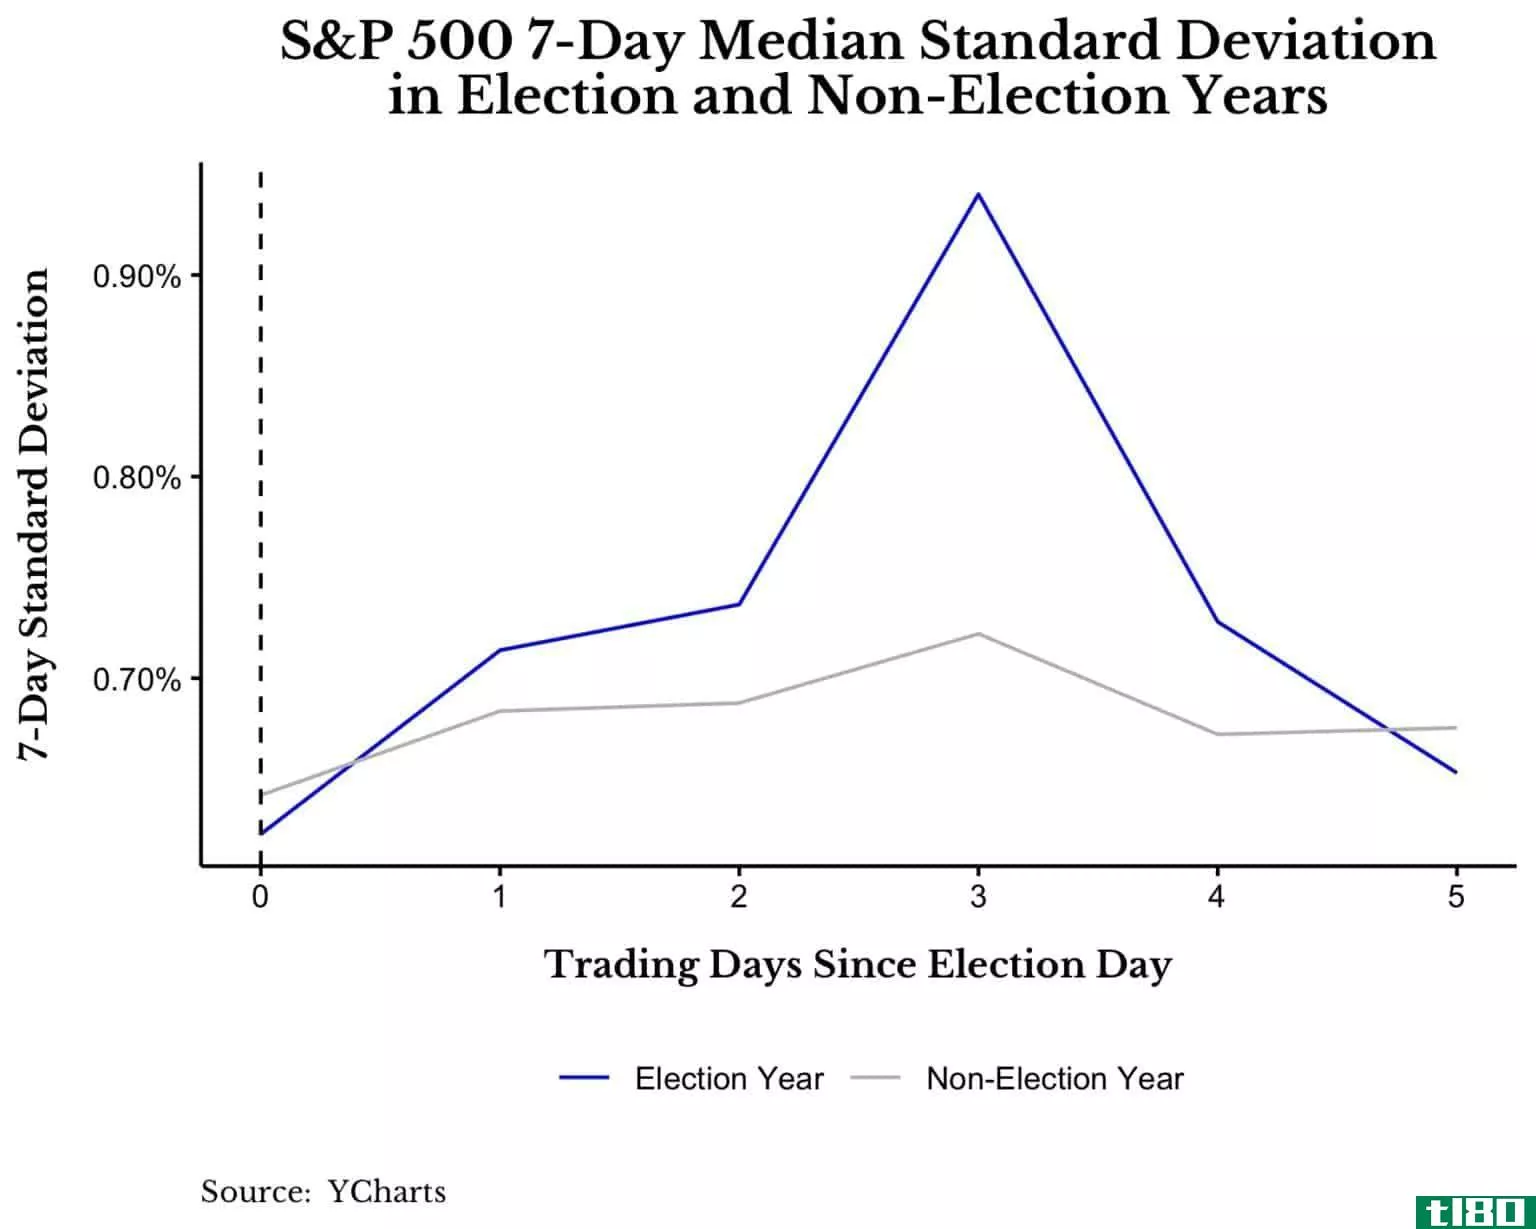 S&P 500 7-day median standard deviation in election and non-election years